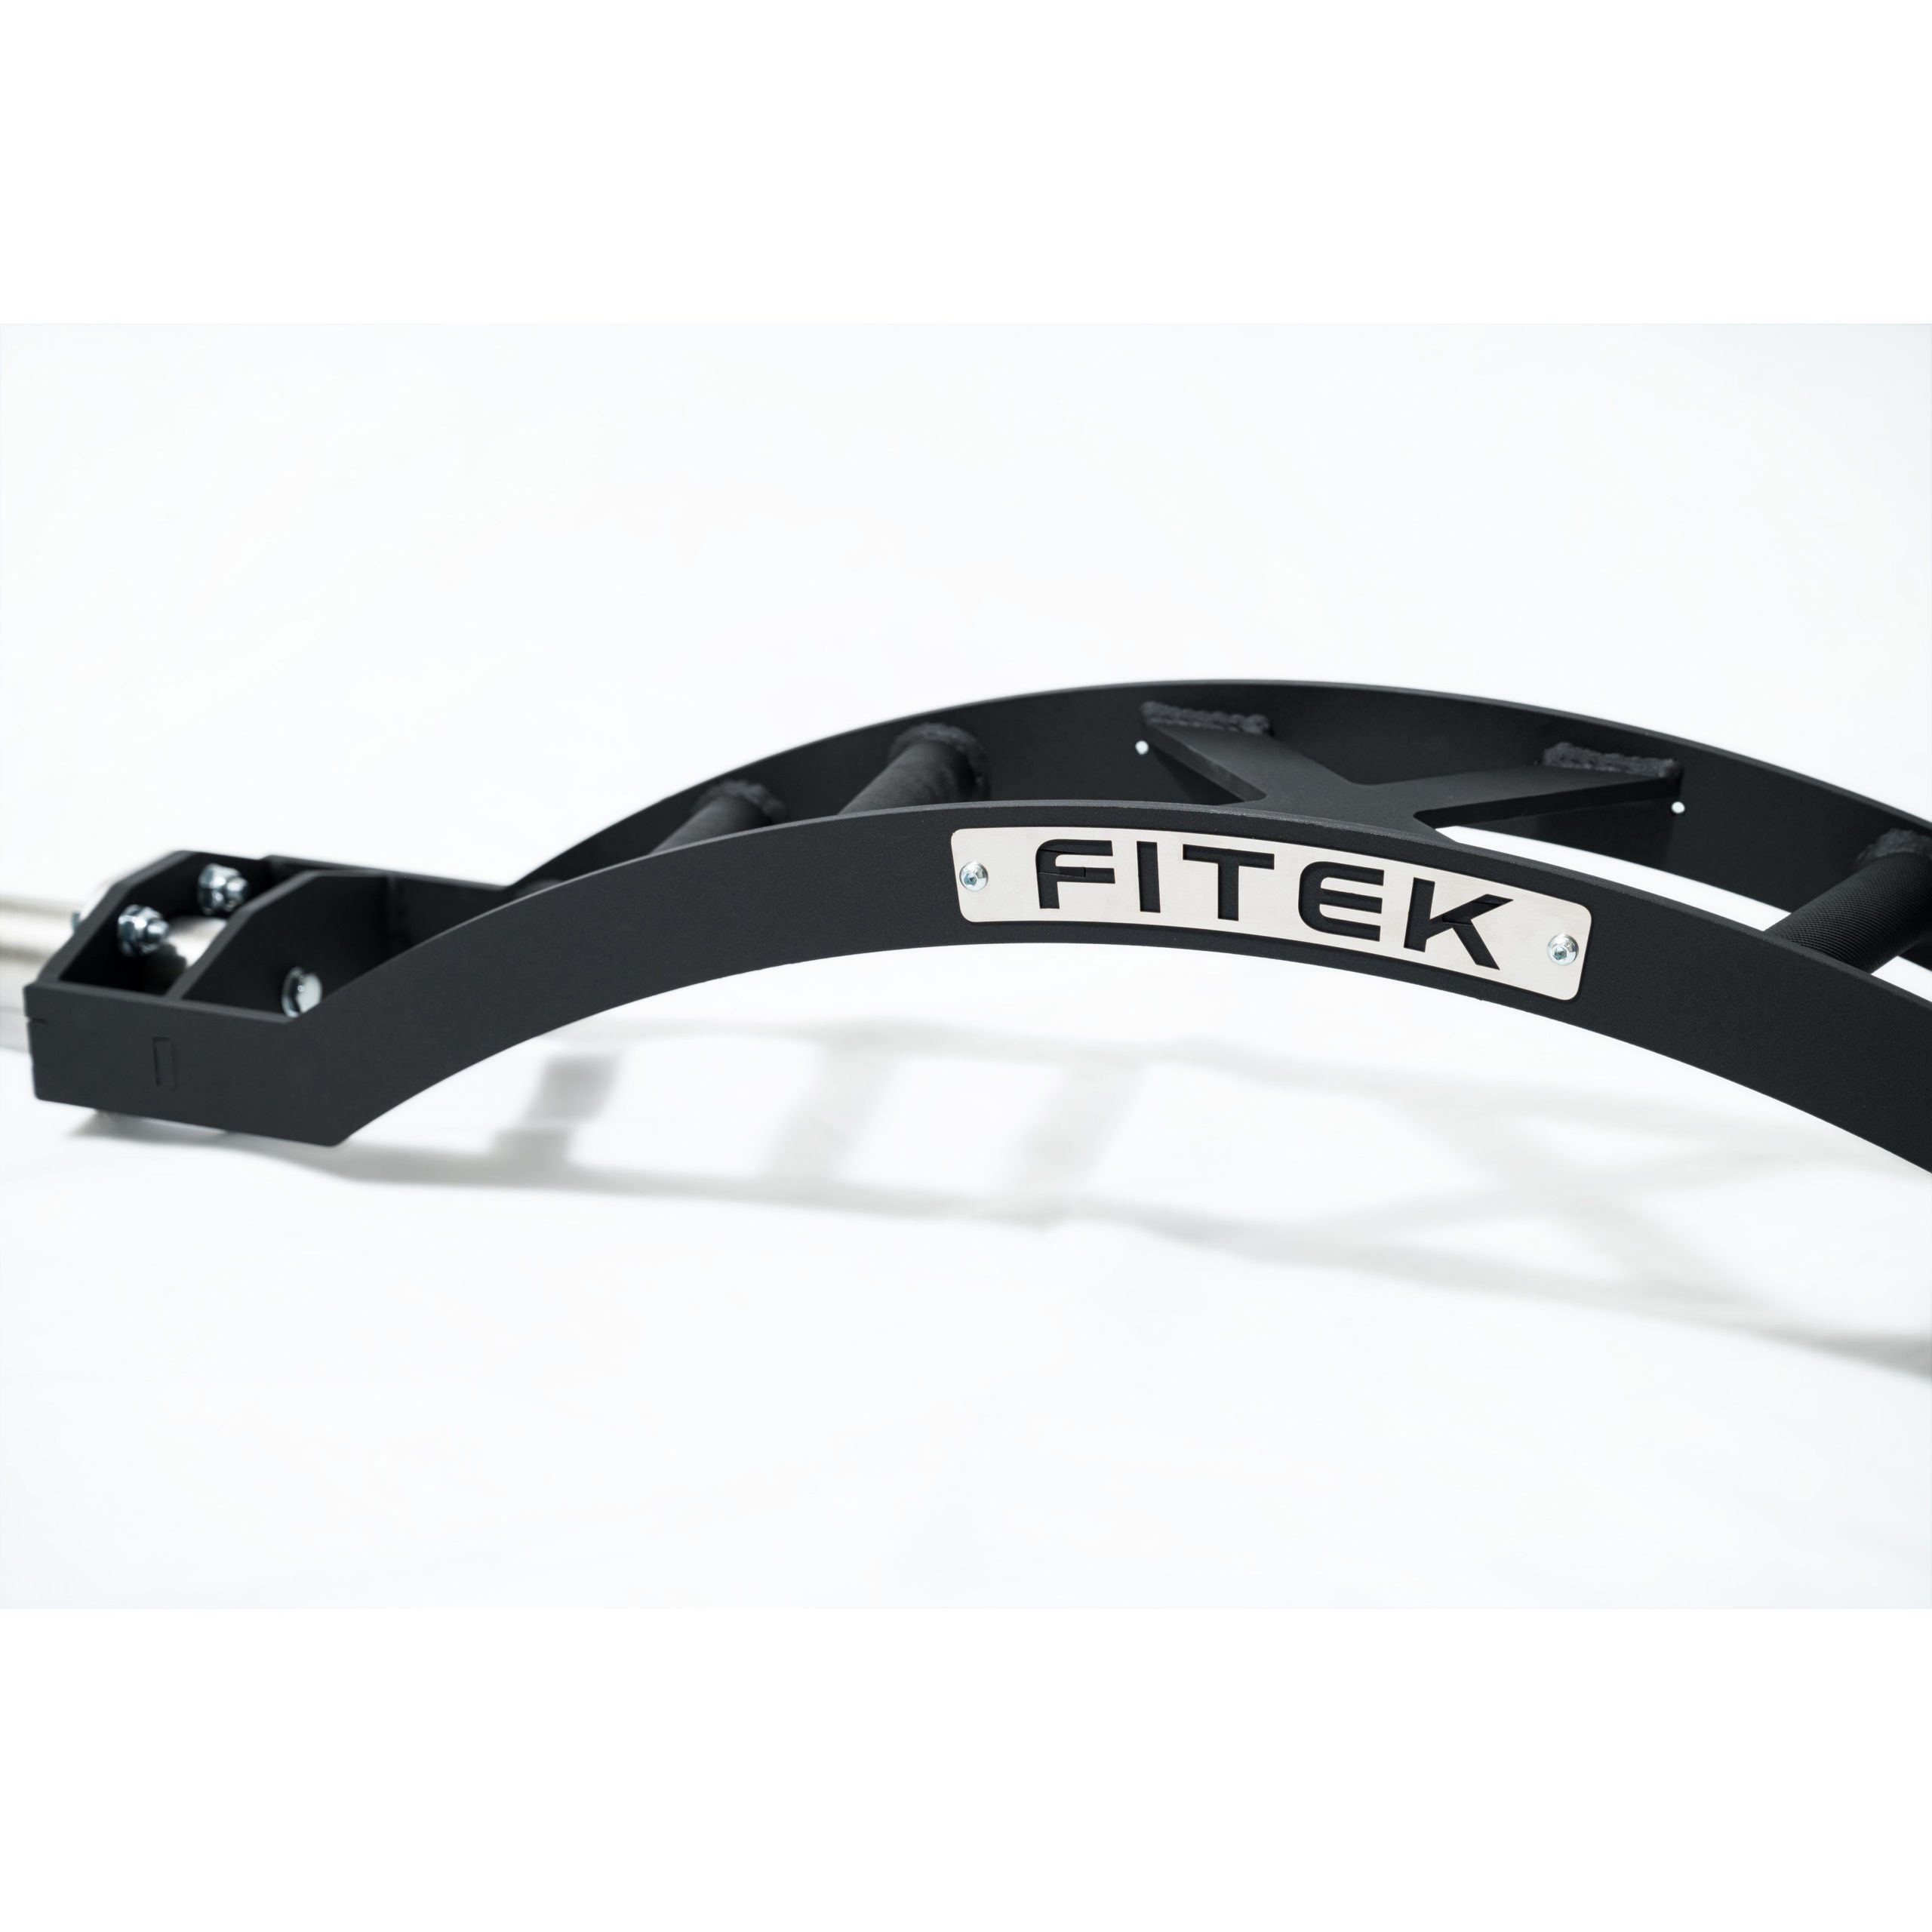 Cambered Multi Grip Barbell - FITEK